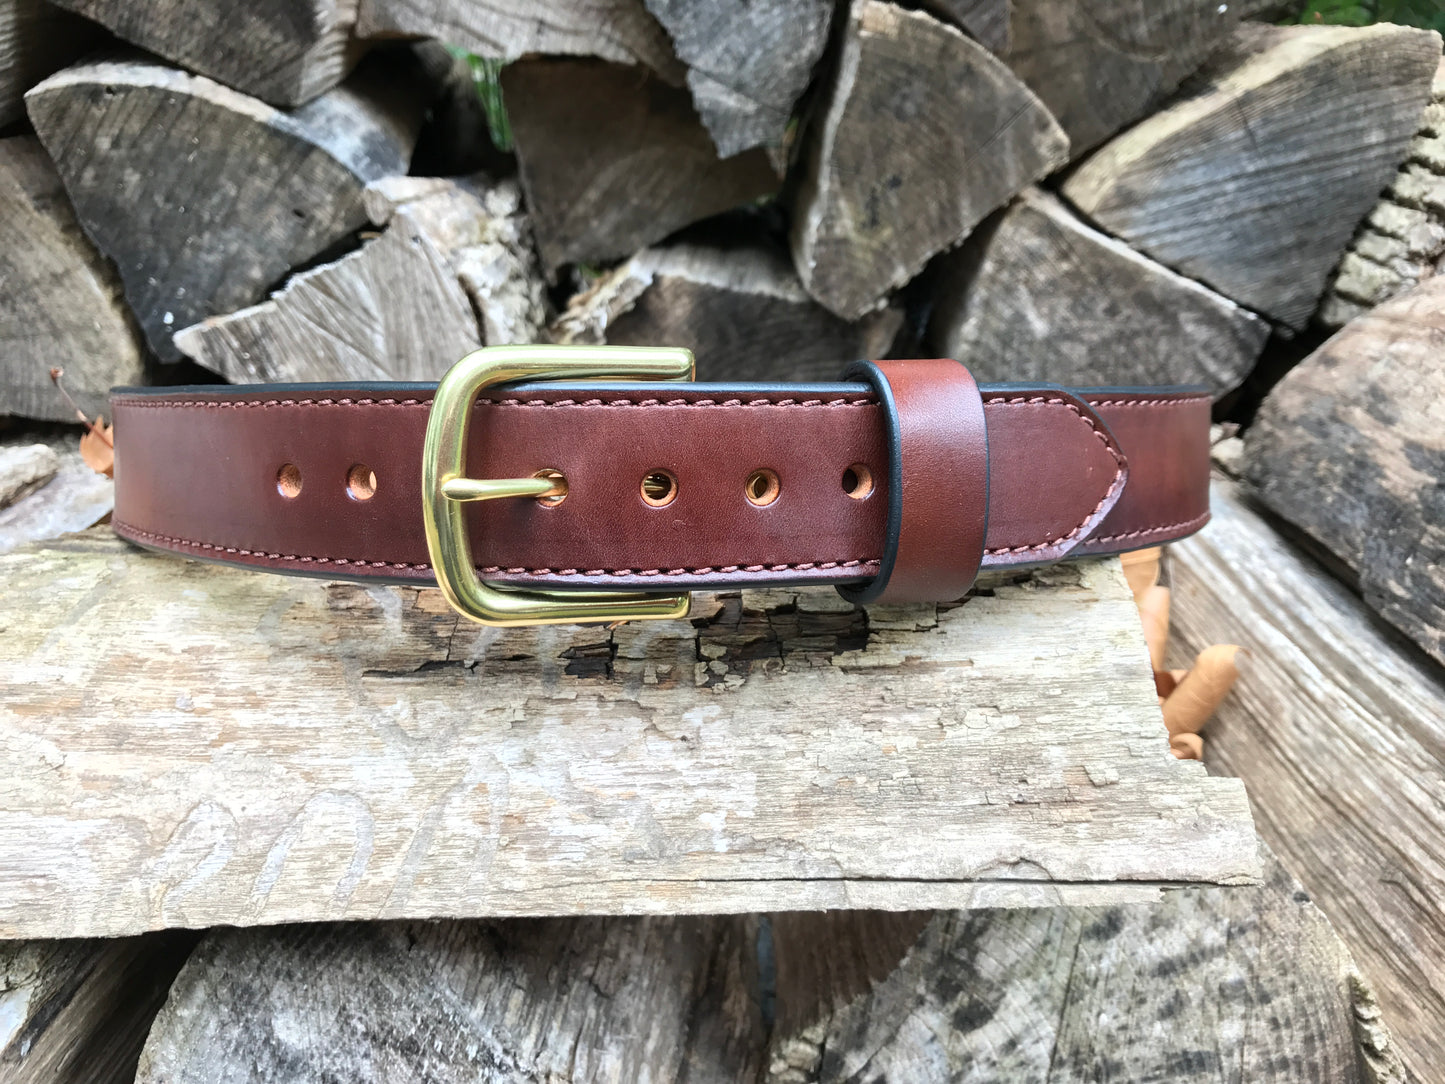 1-1/2" Dual Layer Carry Belts